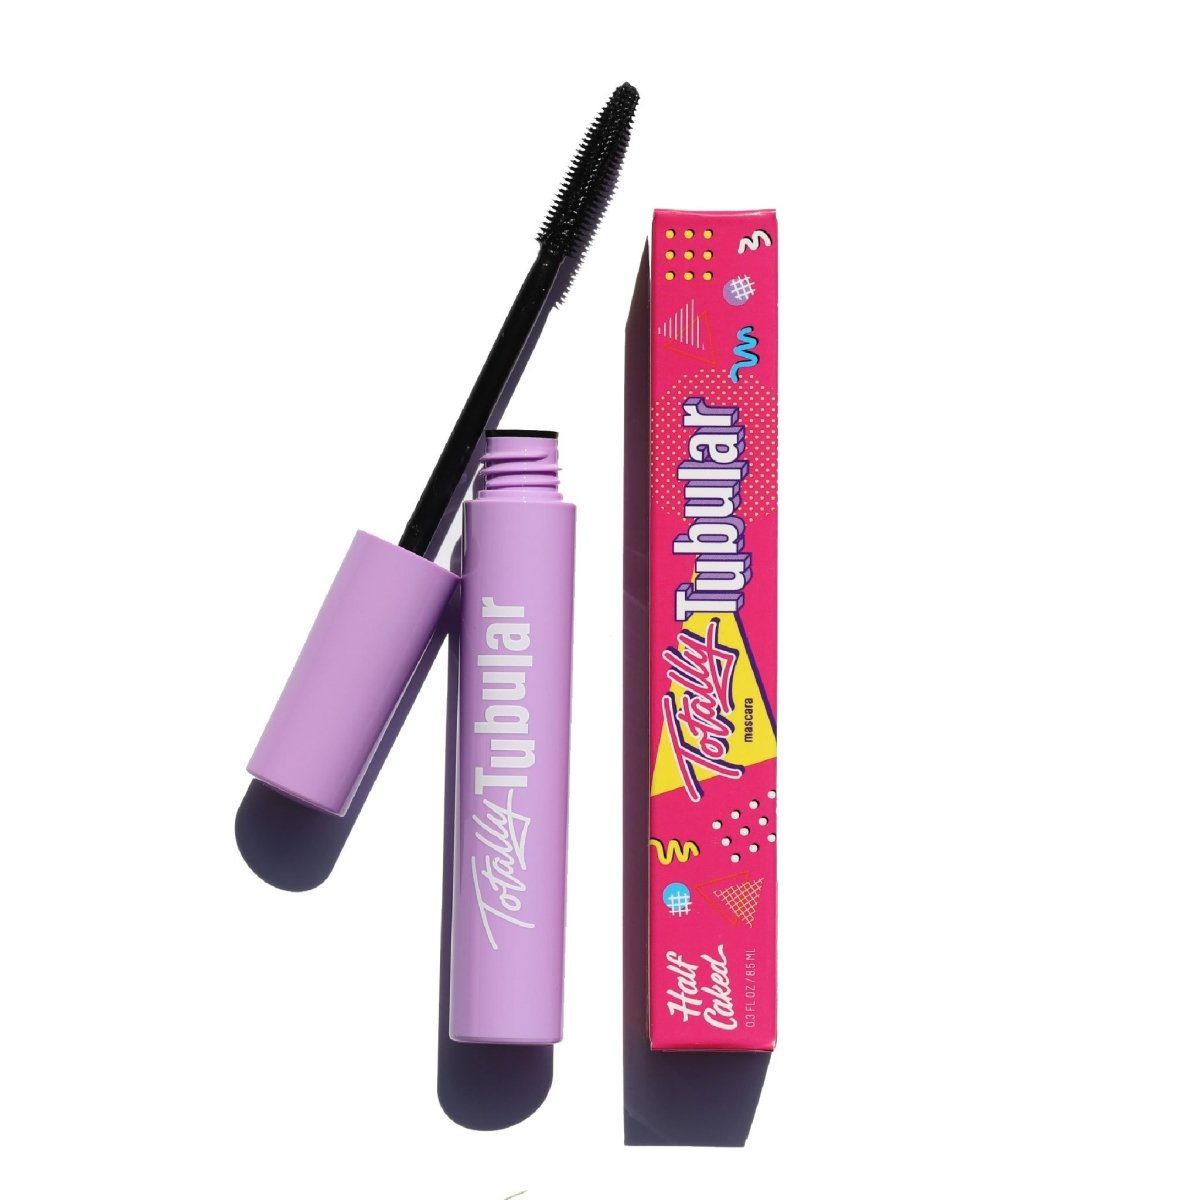 open purple mascara tube with black wire cone applicator and pink box - totally tubular bundle, the heights - half caked makeup